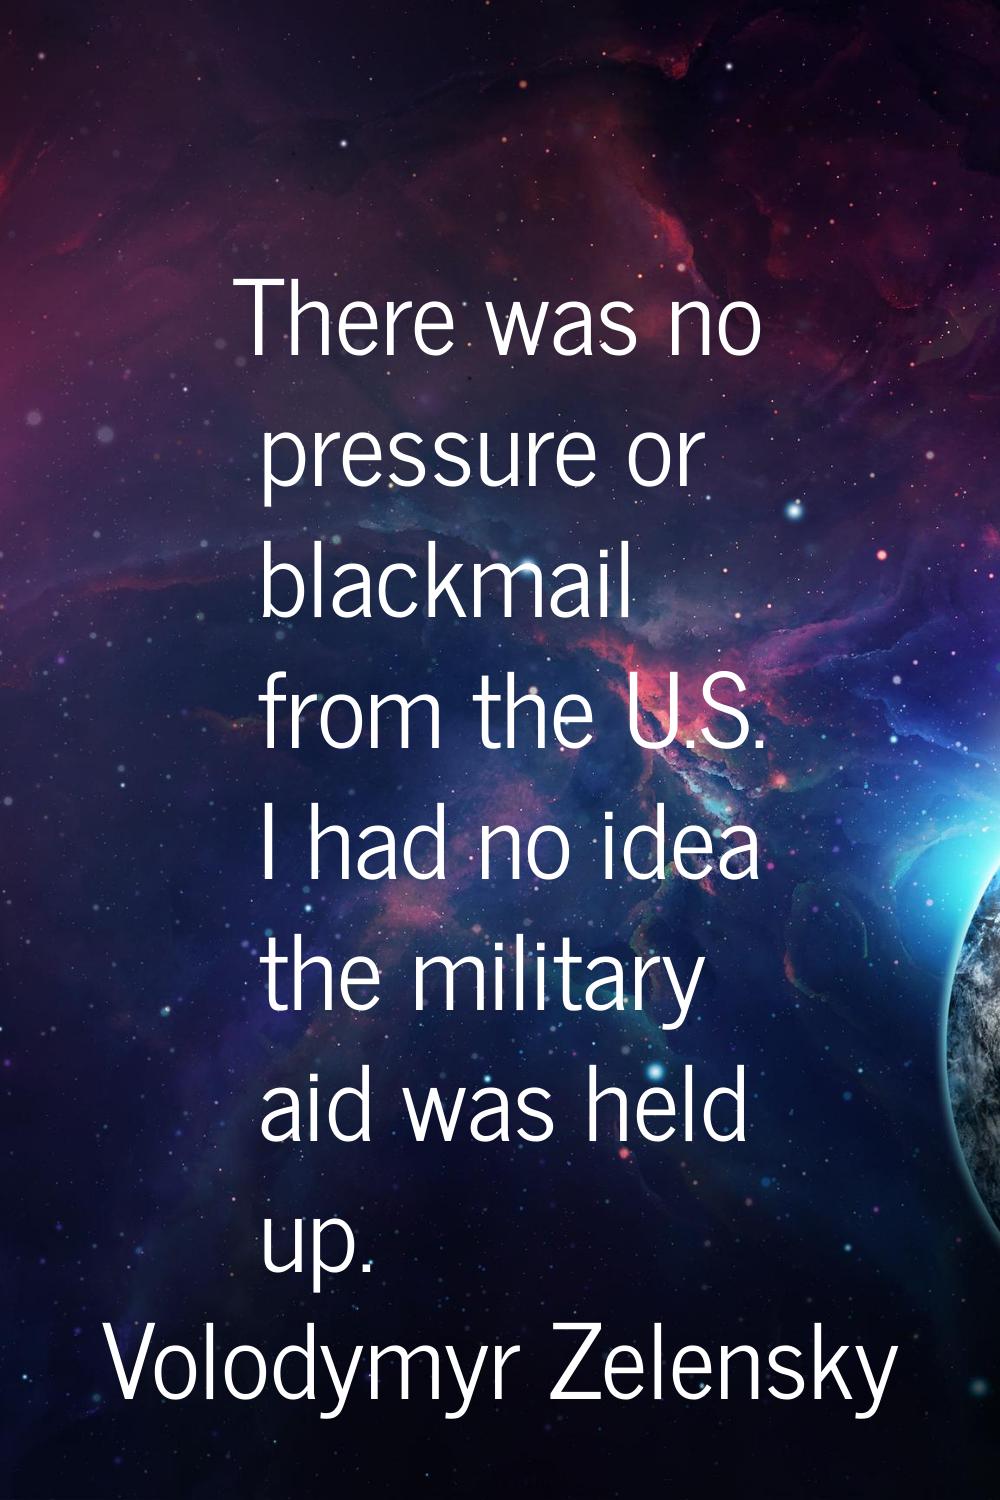 There was no pressure or blackmail from the U.S. I had no idea the military aid was held up.